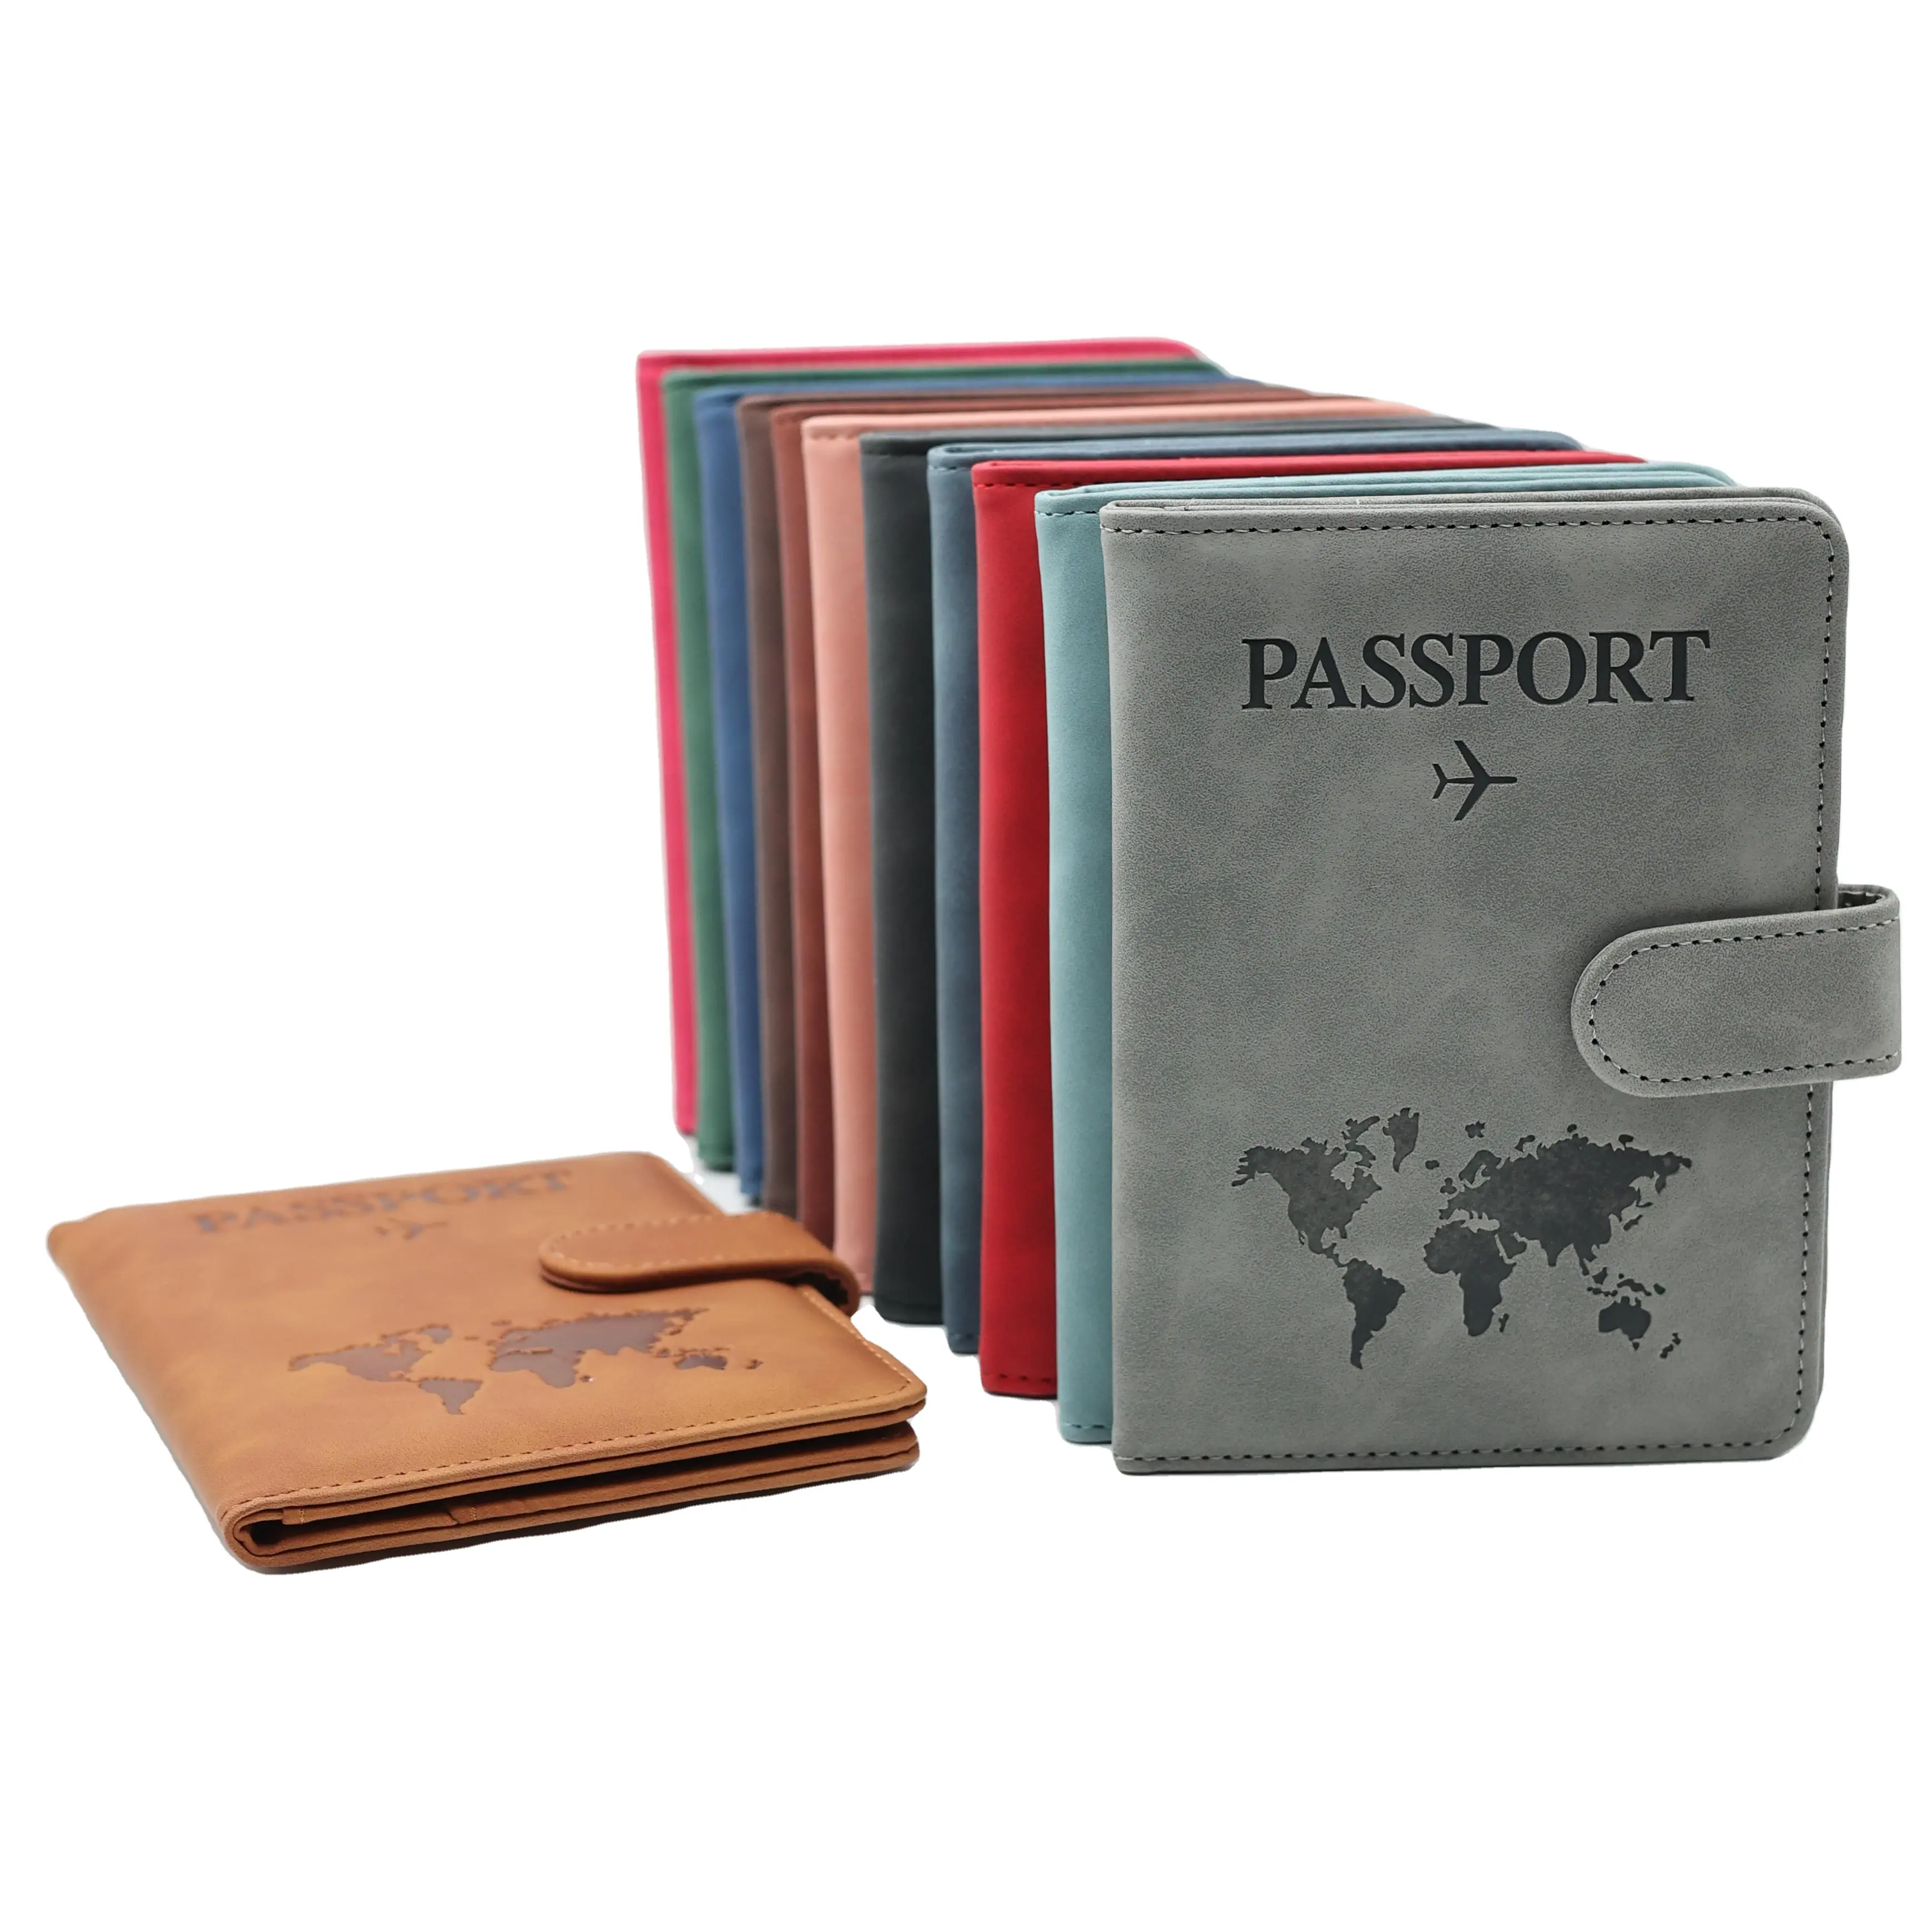 passport holder leather RFID passport bags family travel wallet passport cover with pockets certificate bags case booklet